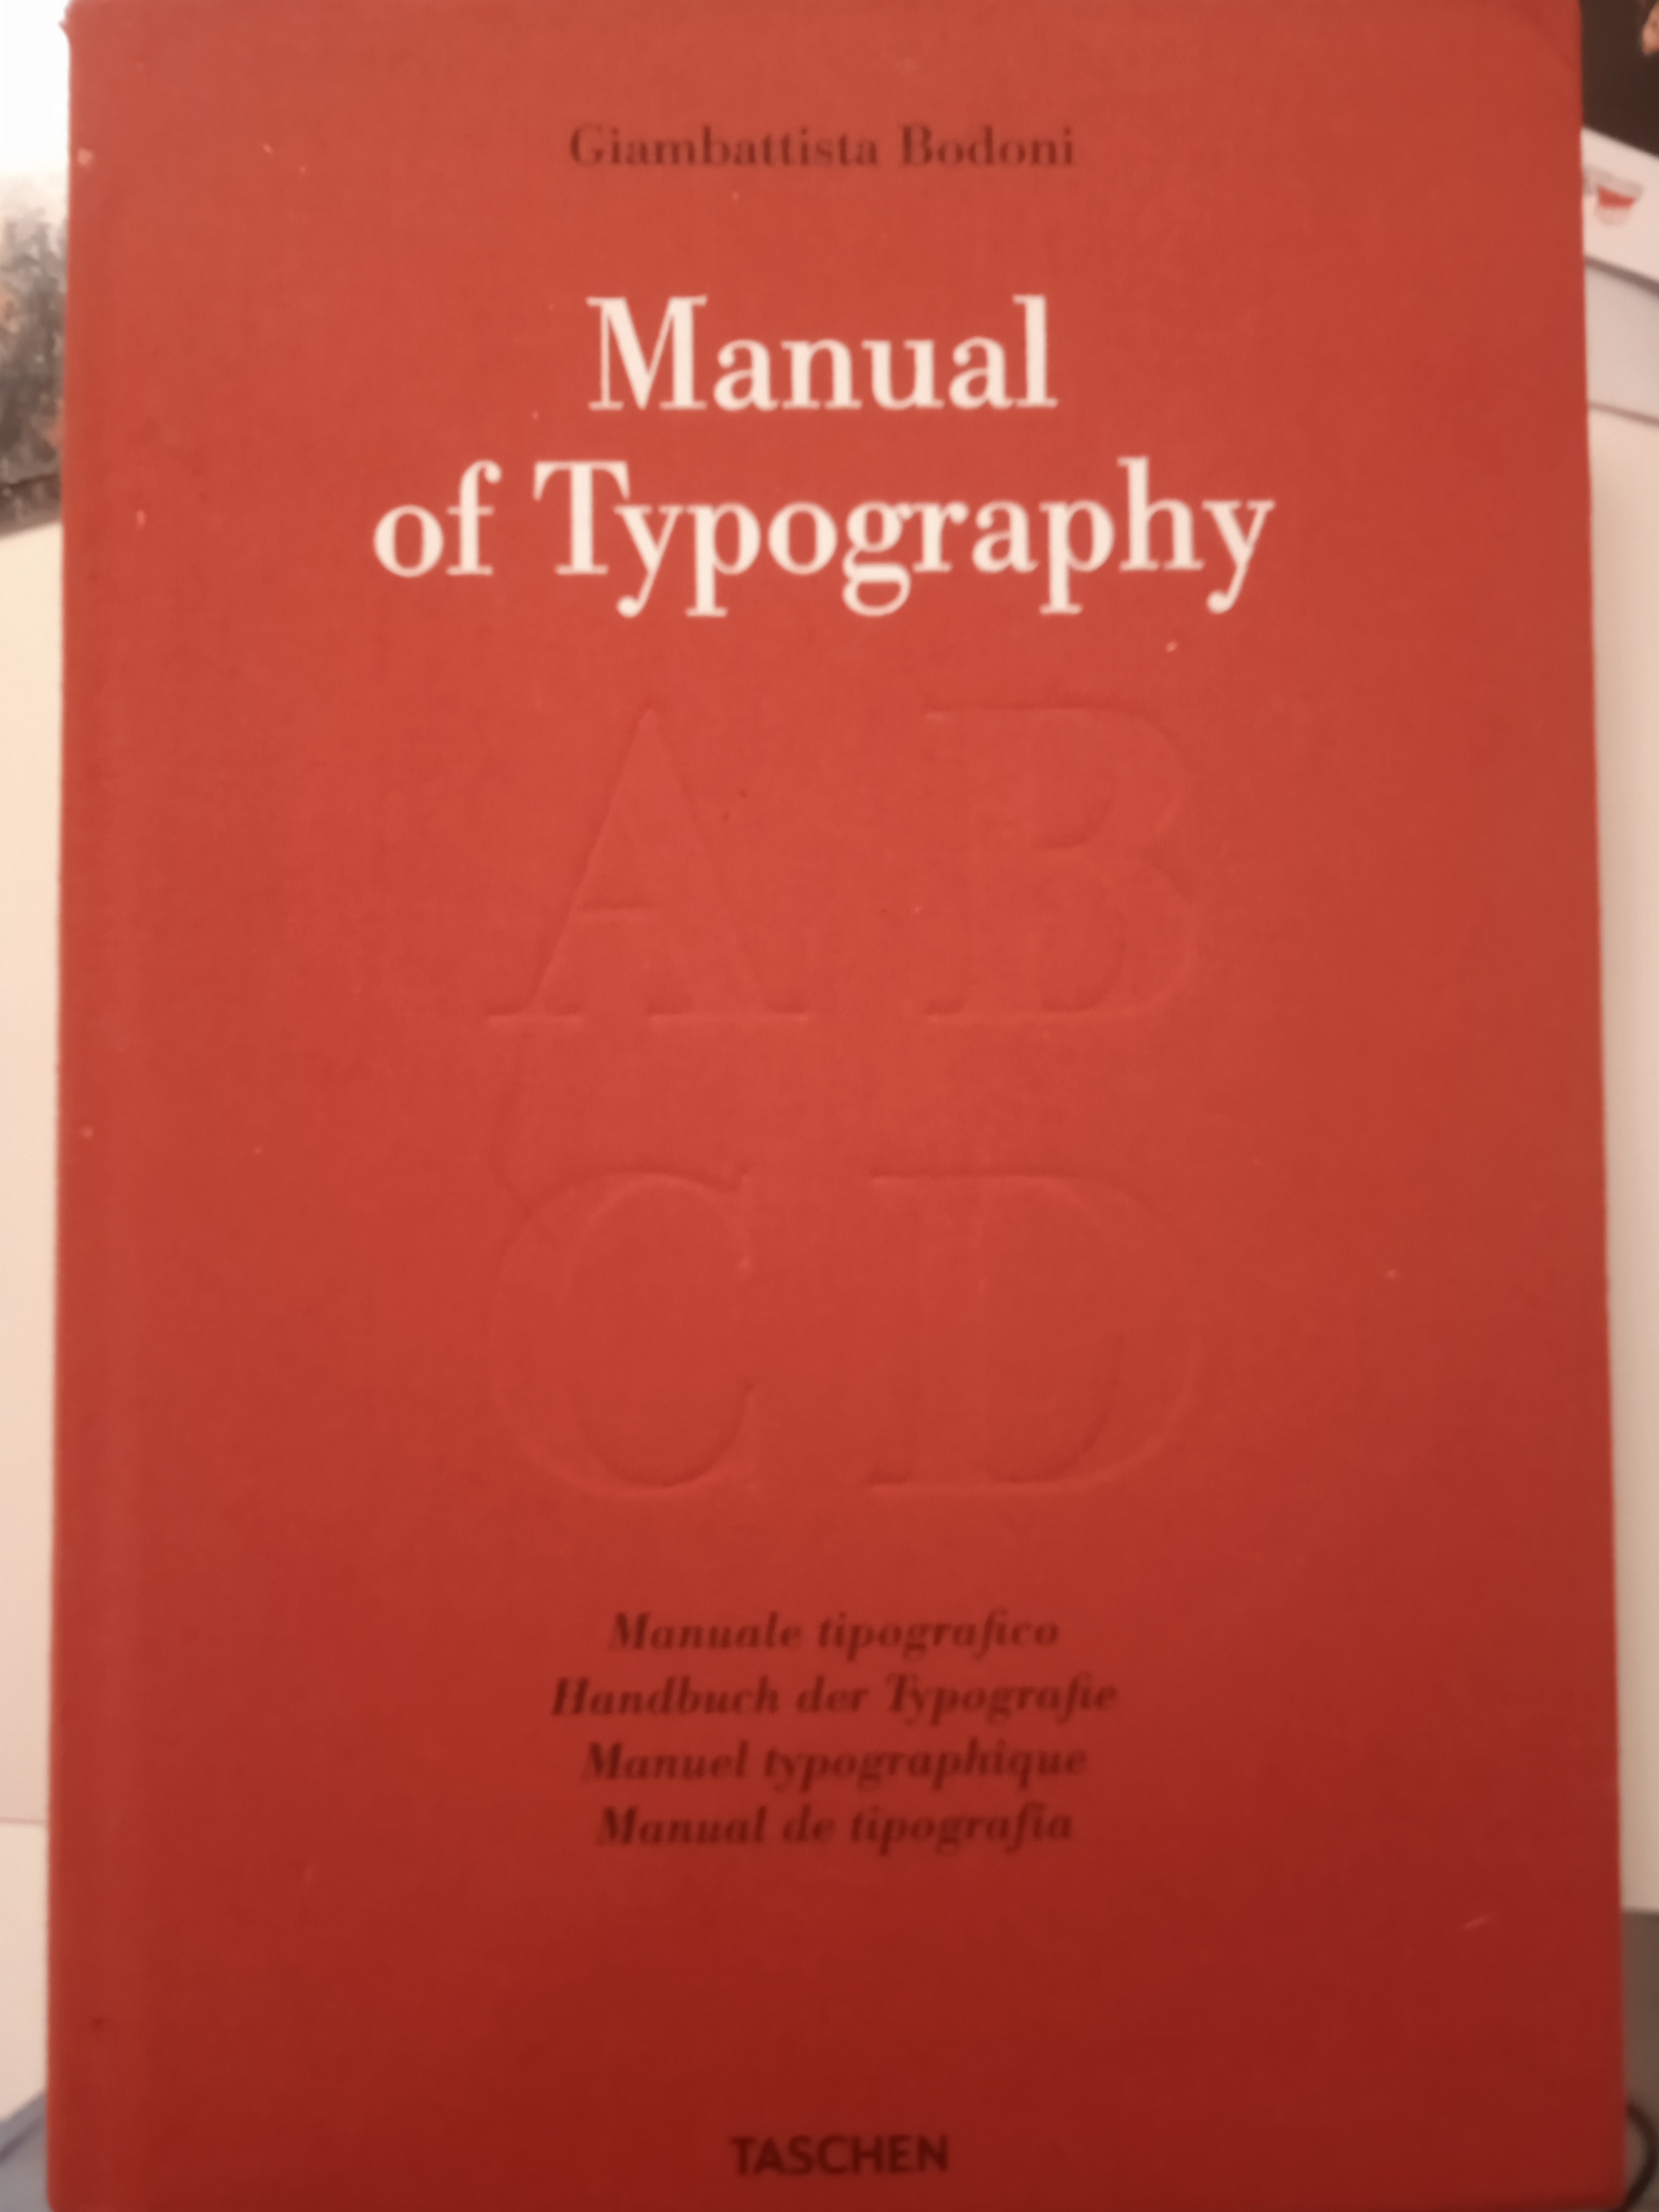 manual of typography